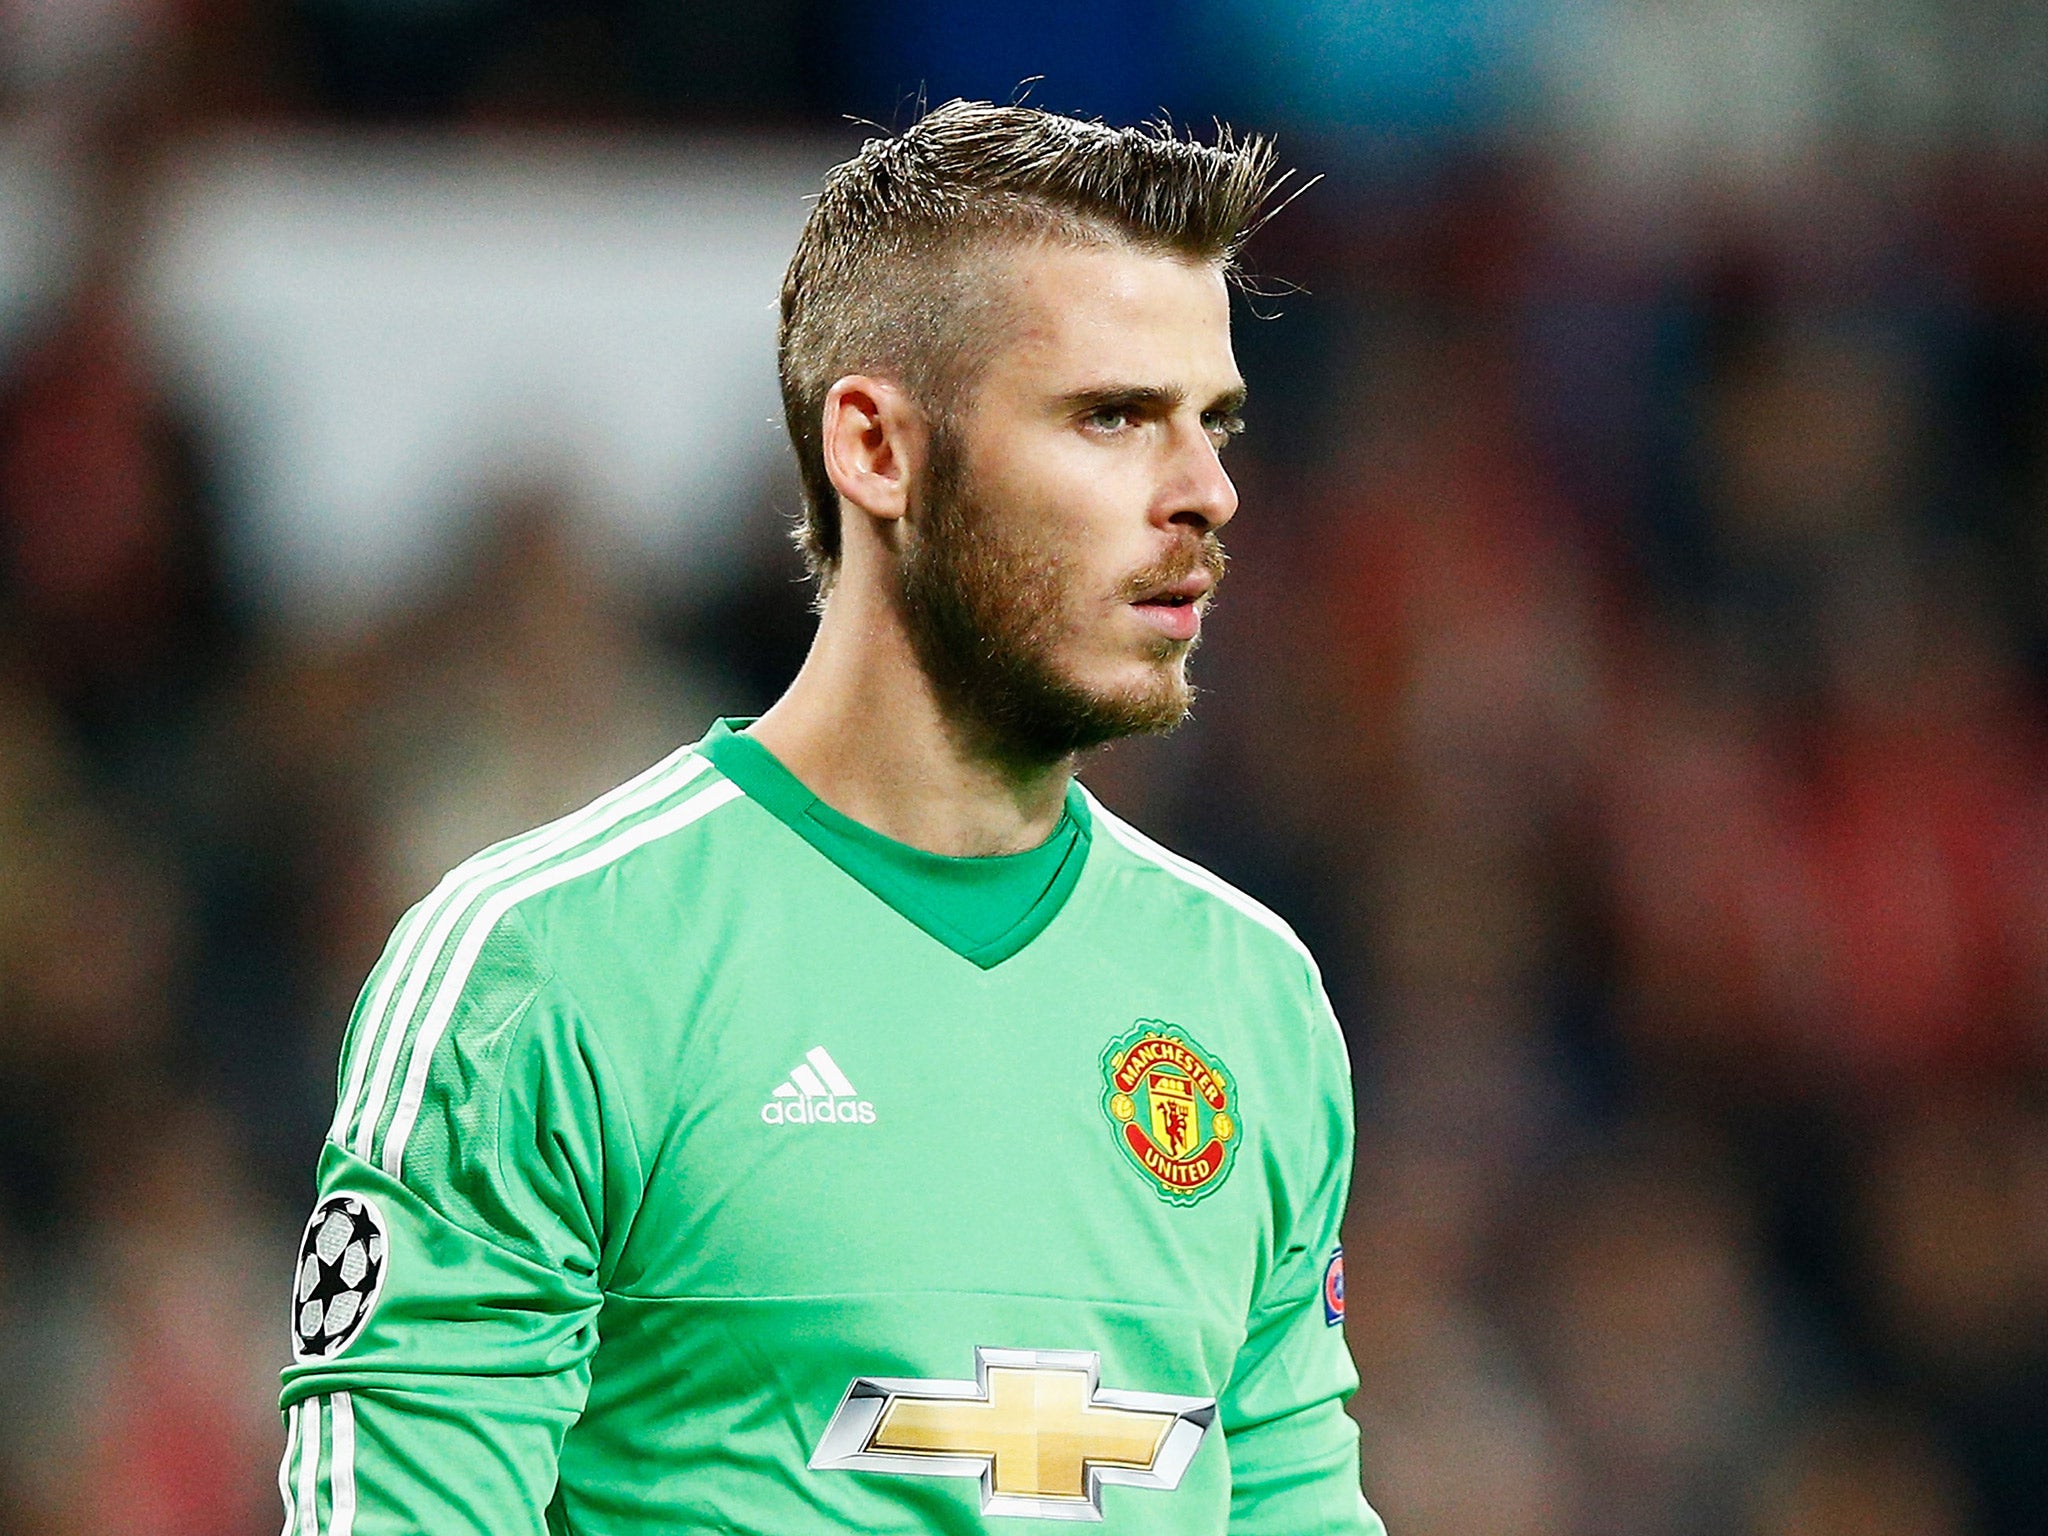 De Gea saw his dream move to Real Madrid collapse on transfer deadline day